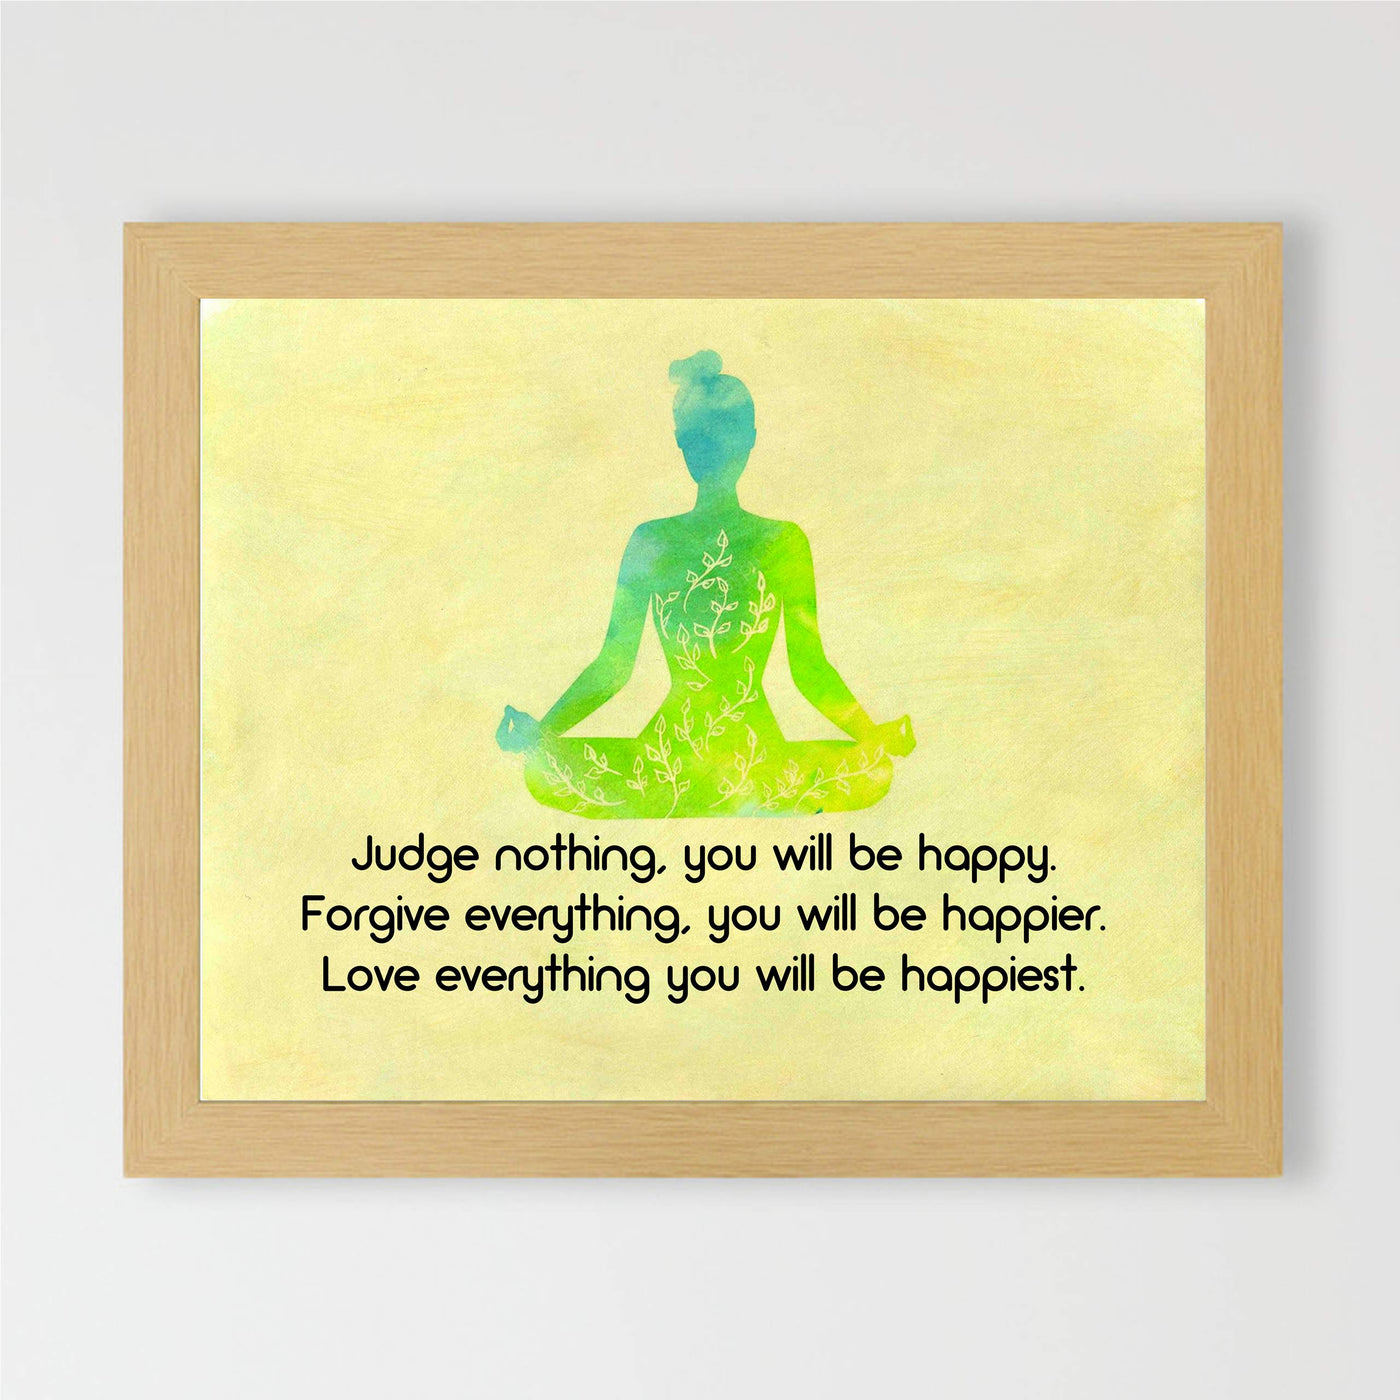 ?Love Everything-You Will be Happiest?-Spiritual Wall Art -10 x 8" Multi-Colored Yoga Pose Print-Ready to Frame. Inspirational Home-Studio-Office-Meditation-Zen Decor. Perfect Life Lesson for All!